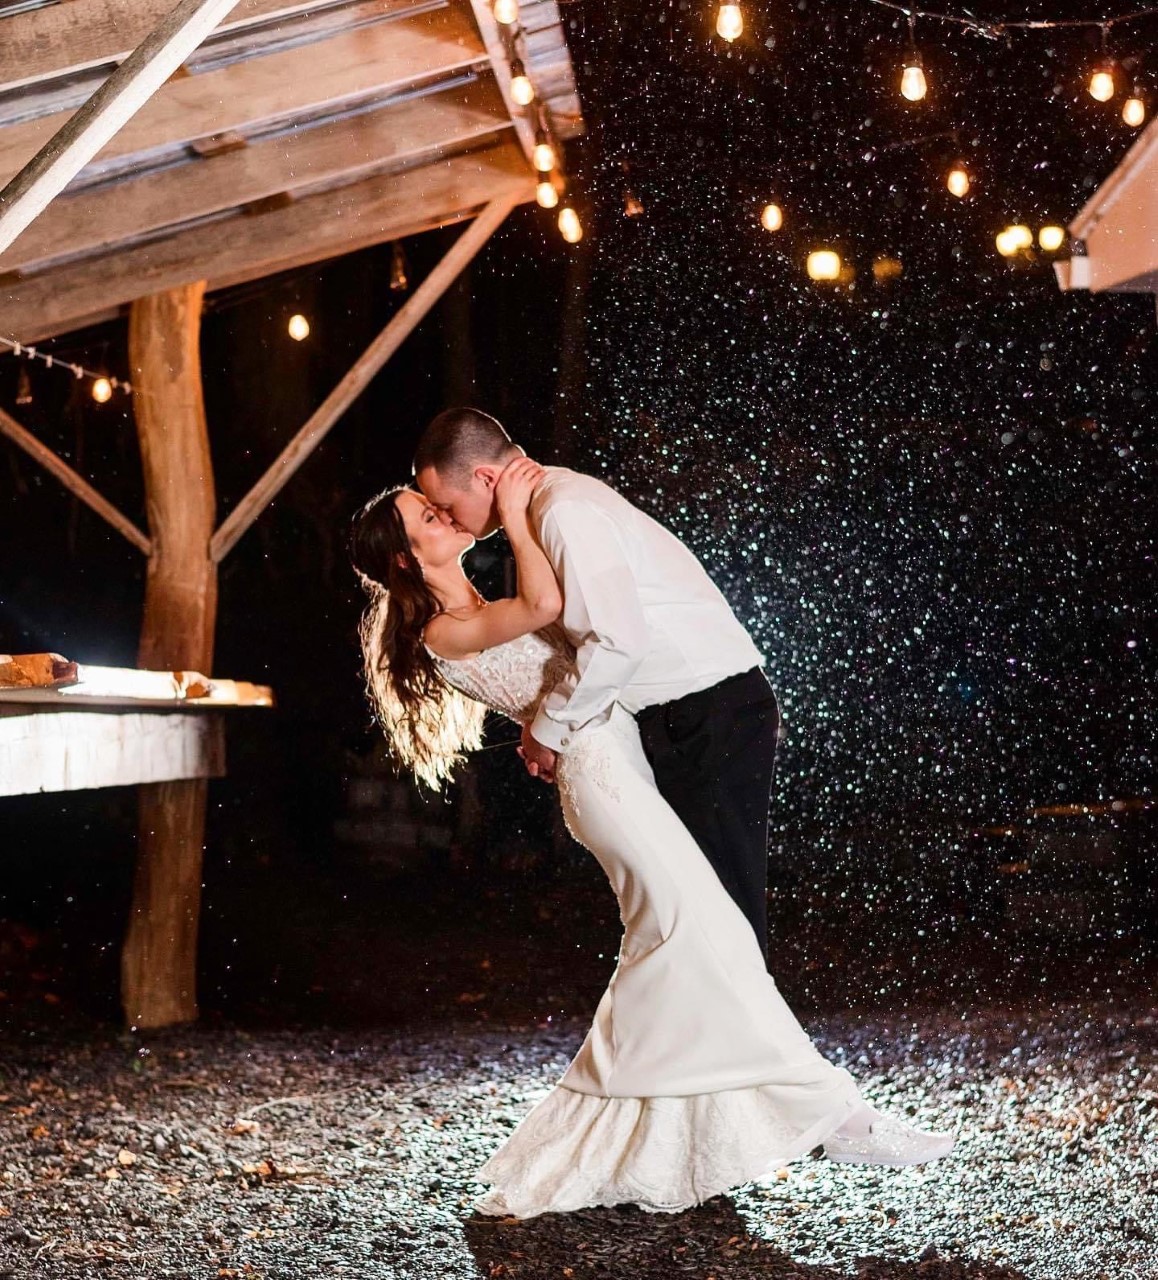 Bride and groom outdoors kissing in the night as it snows